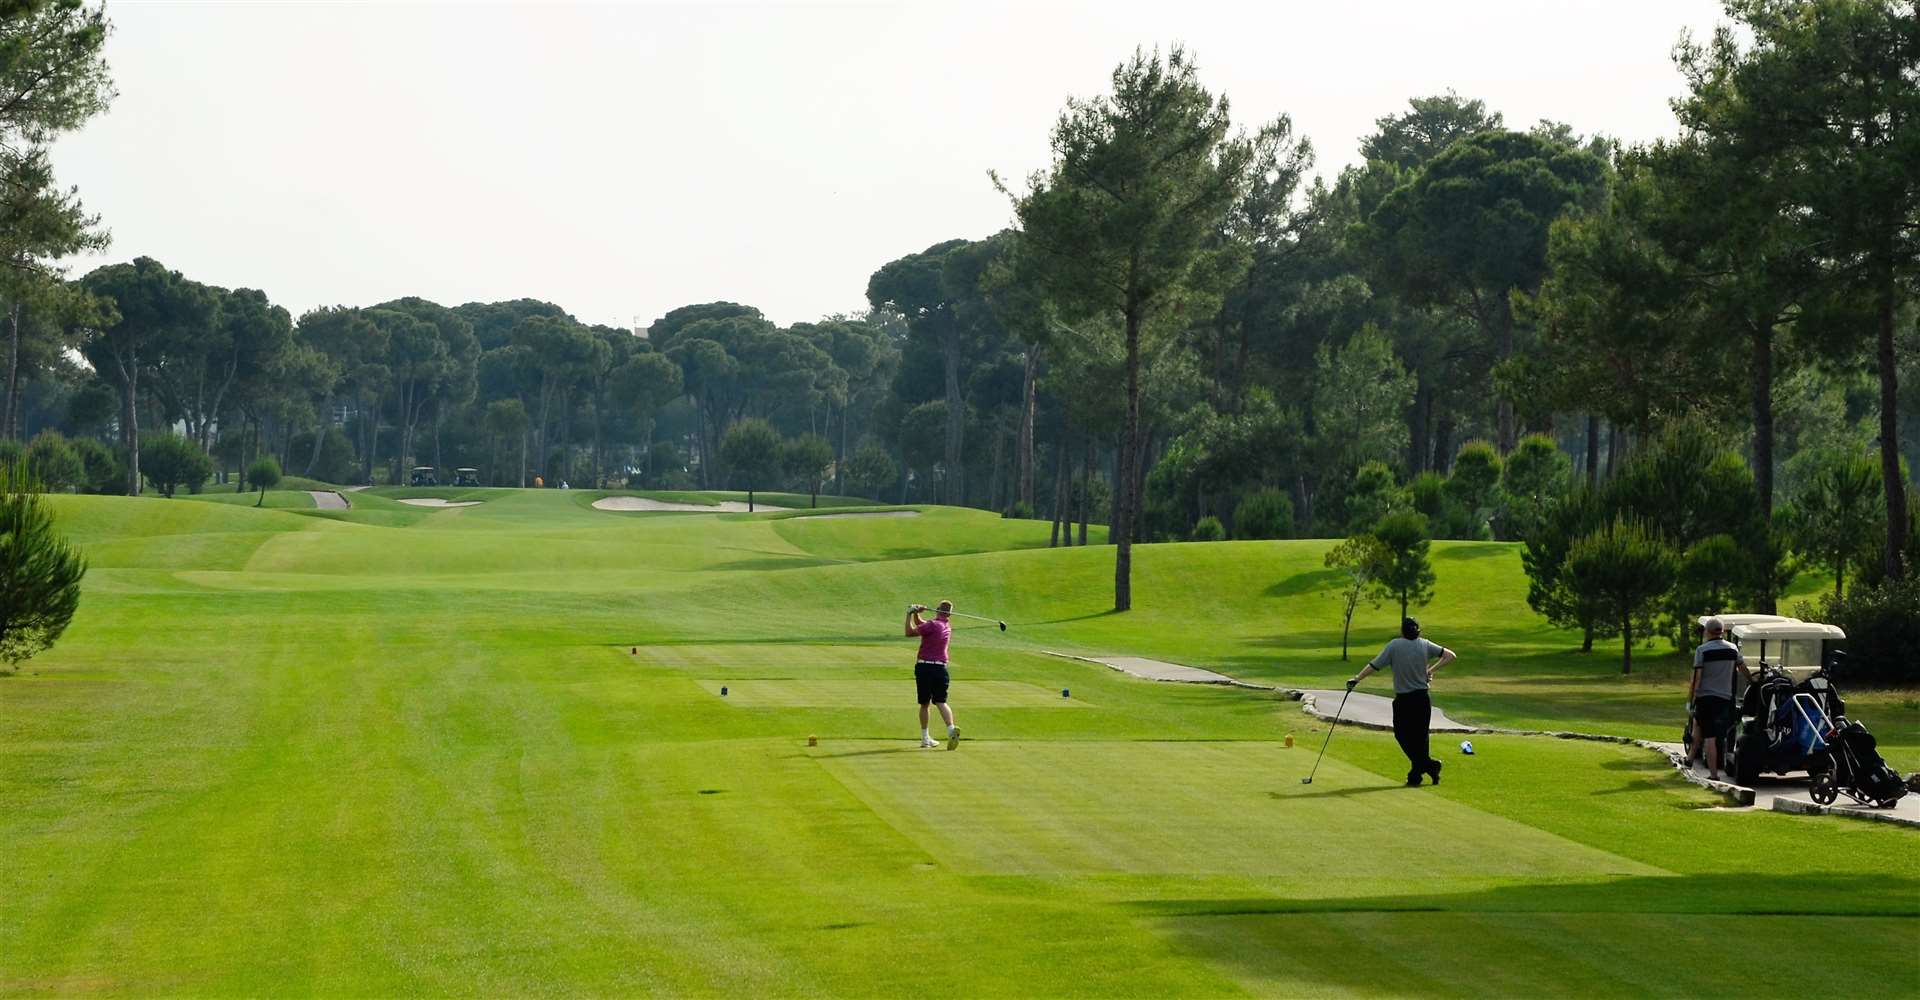 Tree-lined fairways are set in pine forests